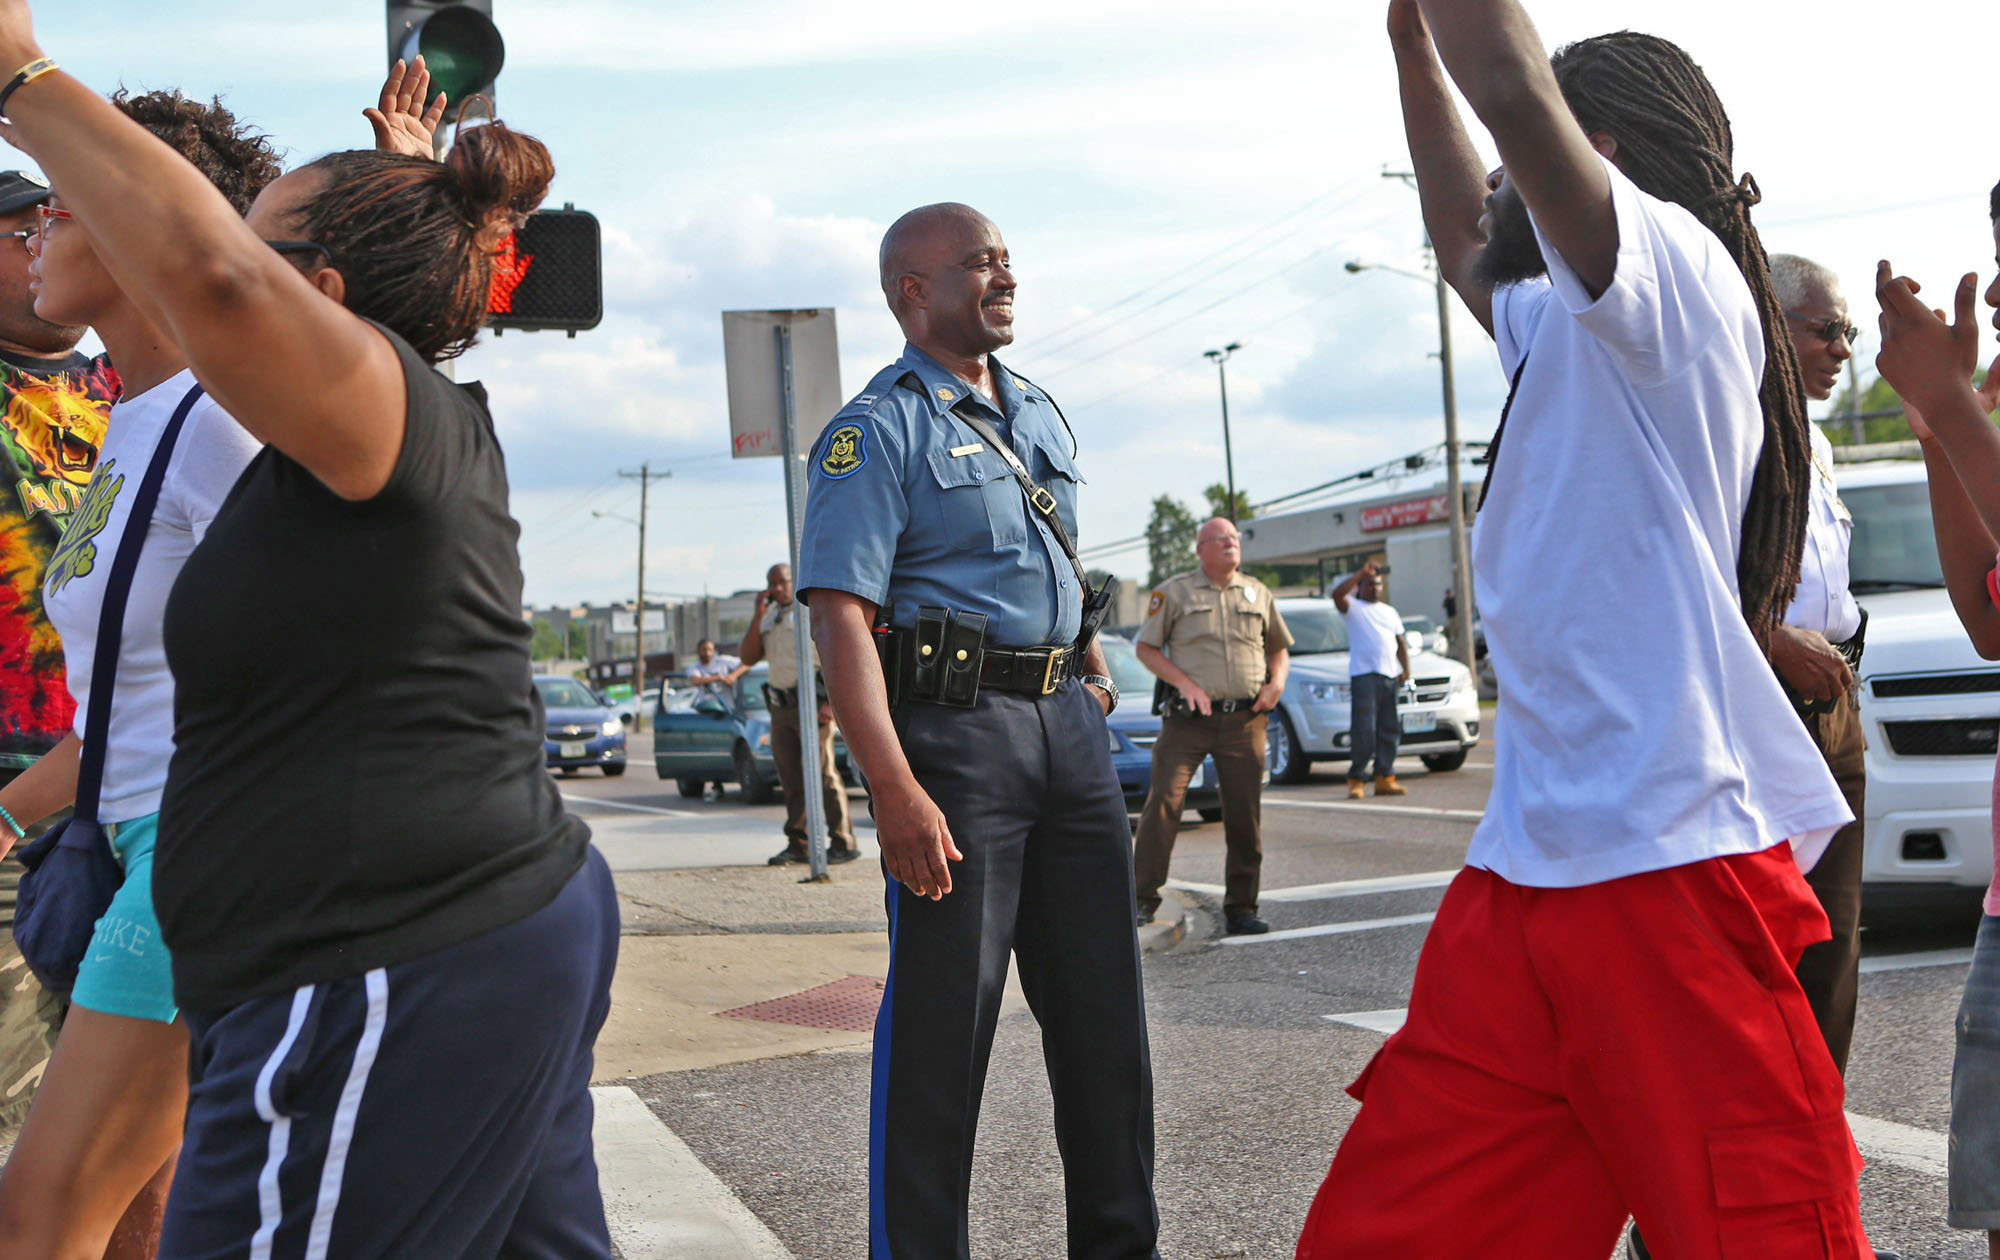 PHOTO: Capt. Ronald Johnson of the Missouri Highway Patrol smiles at demonstrators march along West Florissant Avenue in Ferguson, Mo., on Aug. 14, 2014.